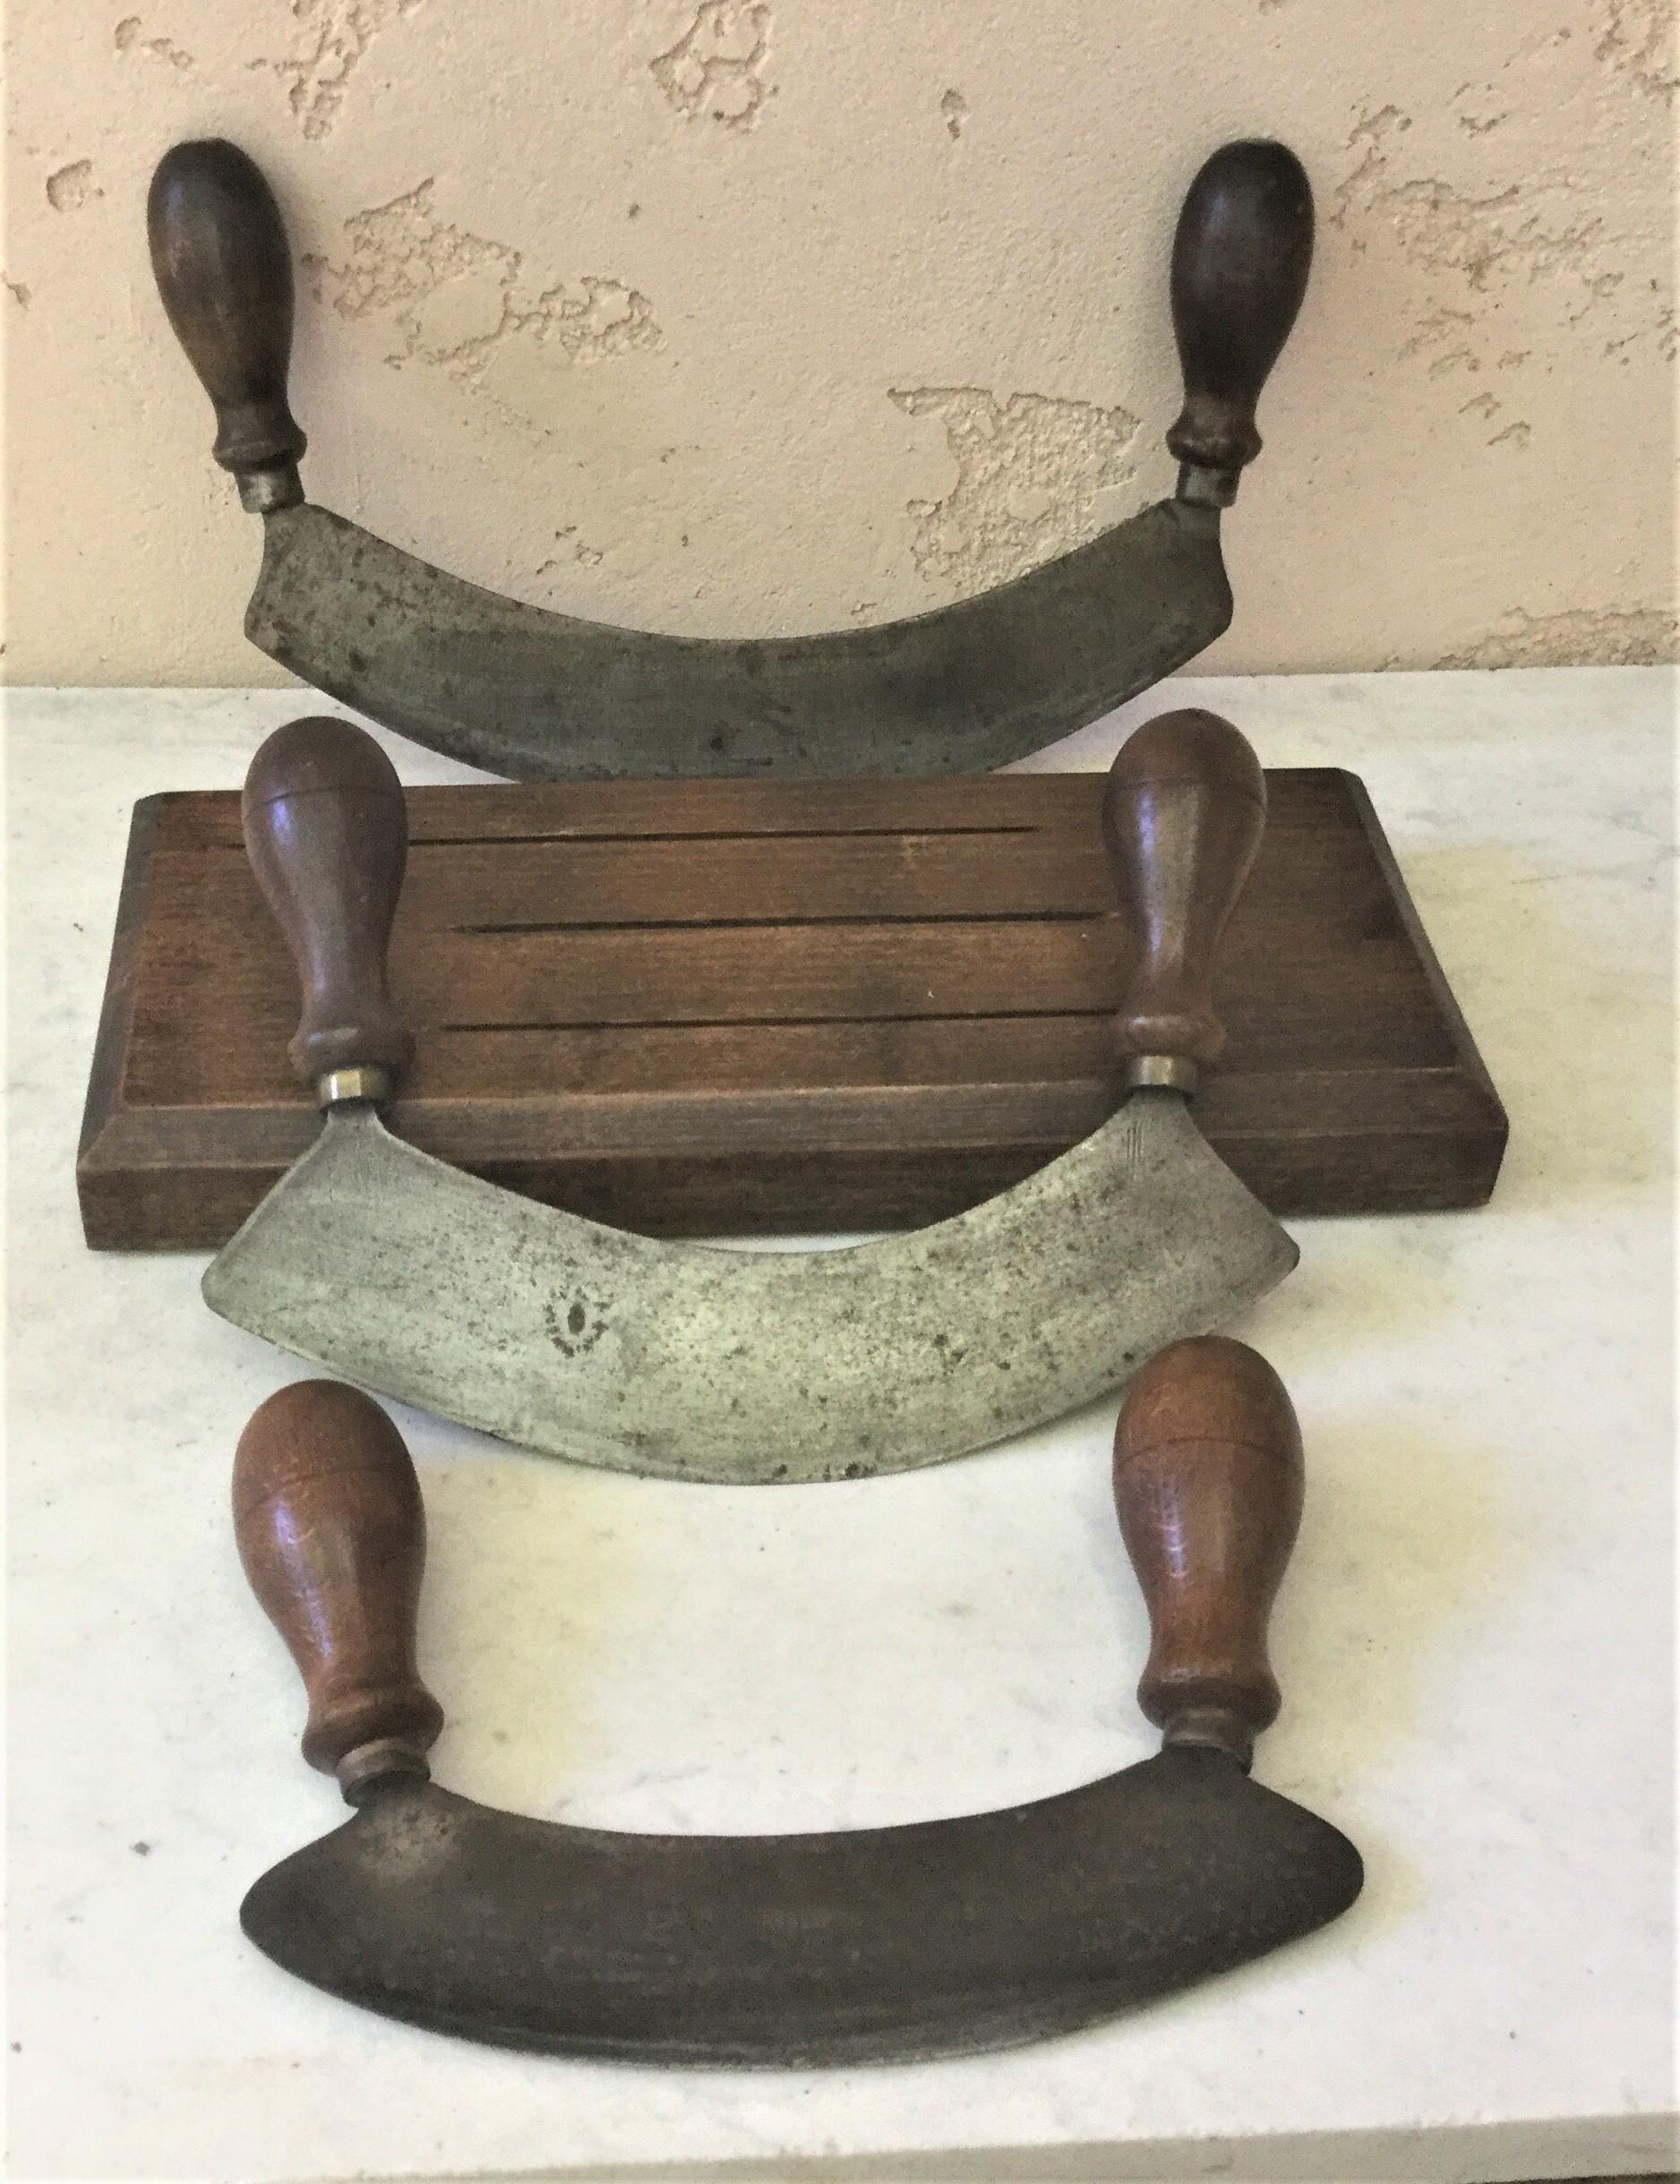 French set of 3 choppers in a wood stand with a forged iron blade and two turned wood handles.
Size of the choppers / 11.5